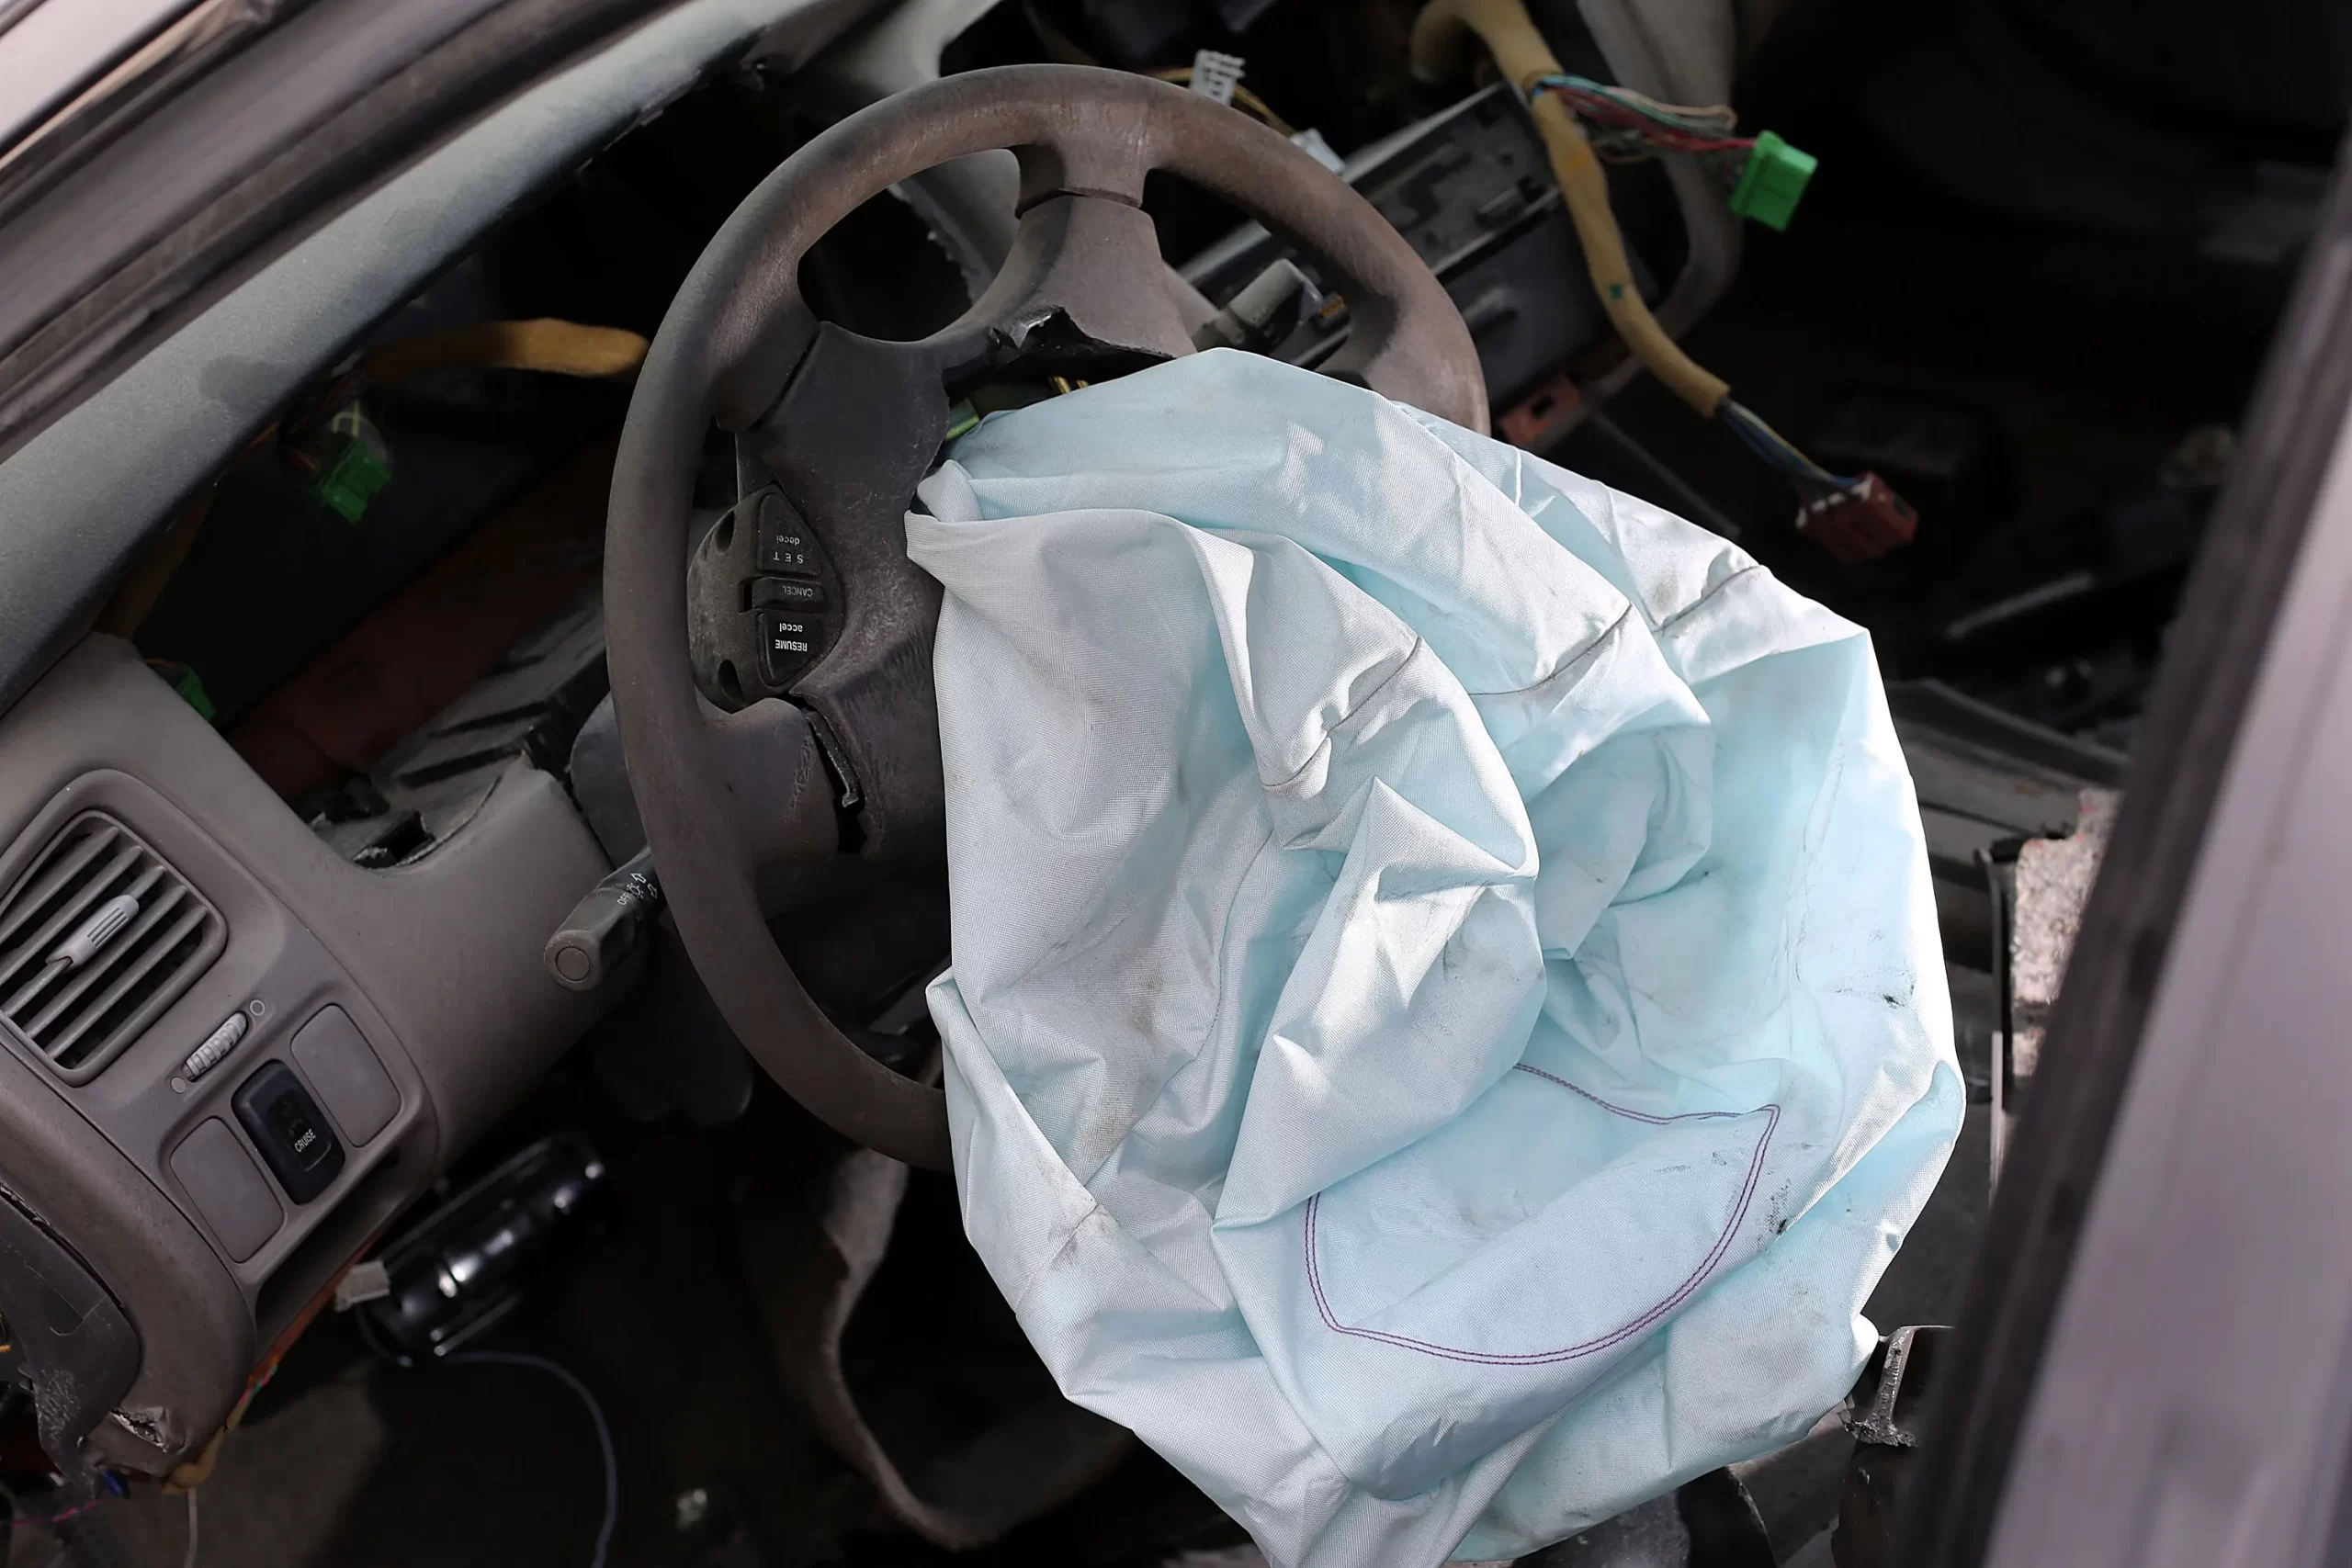 Recall On Mercedes-Benz Airbag: What You Need to Know as an Owner!